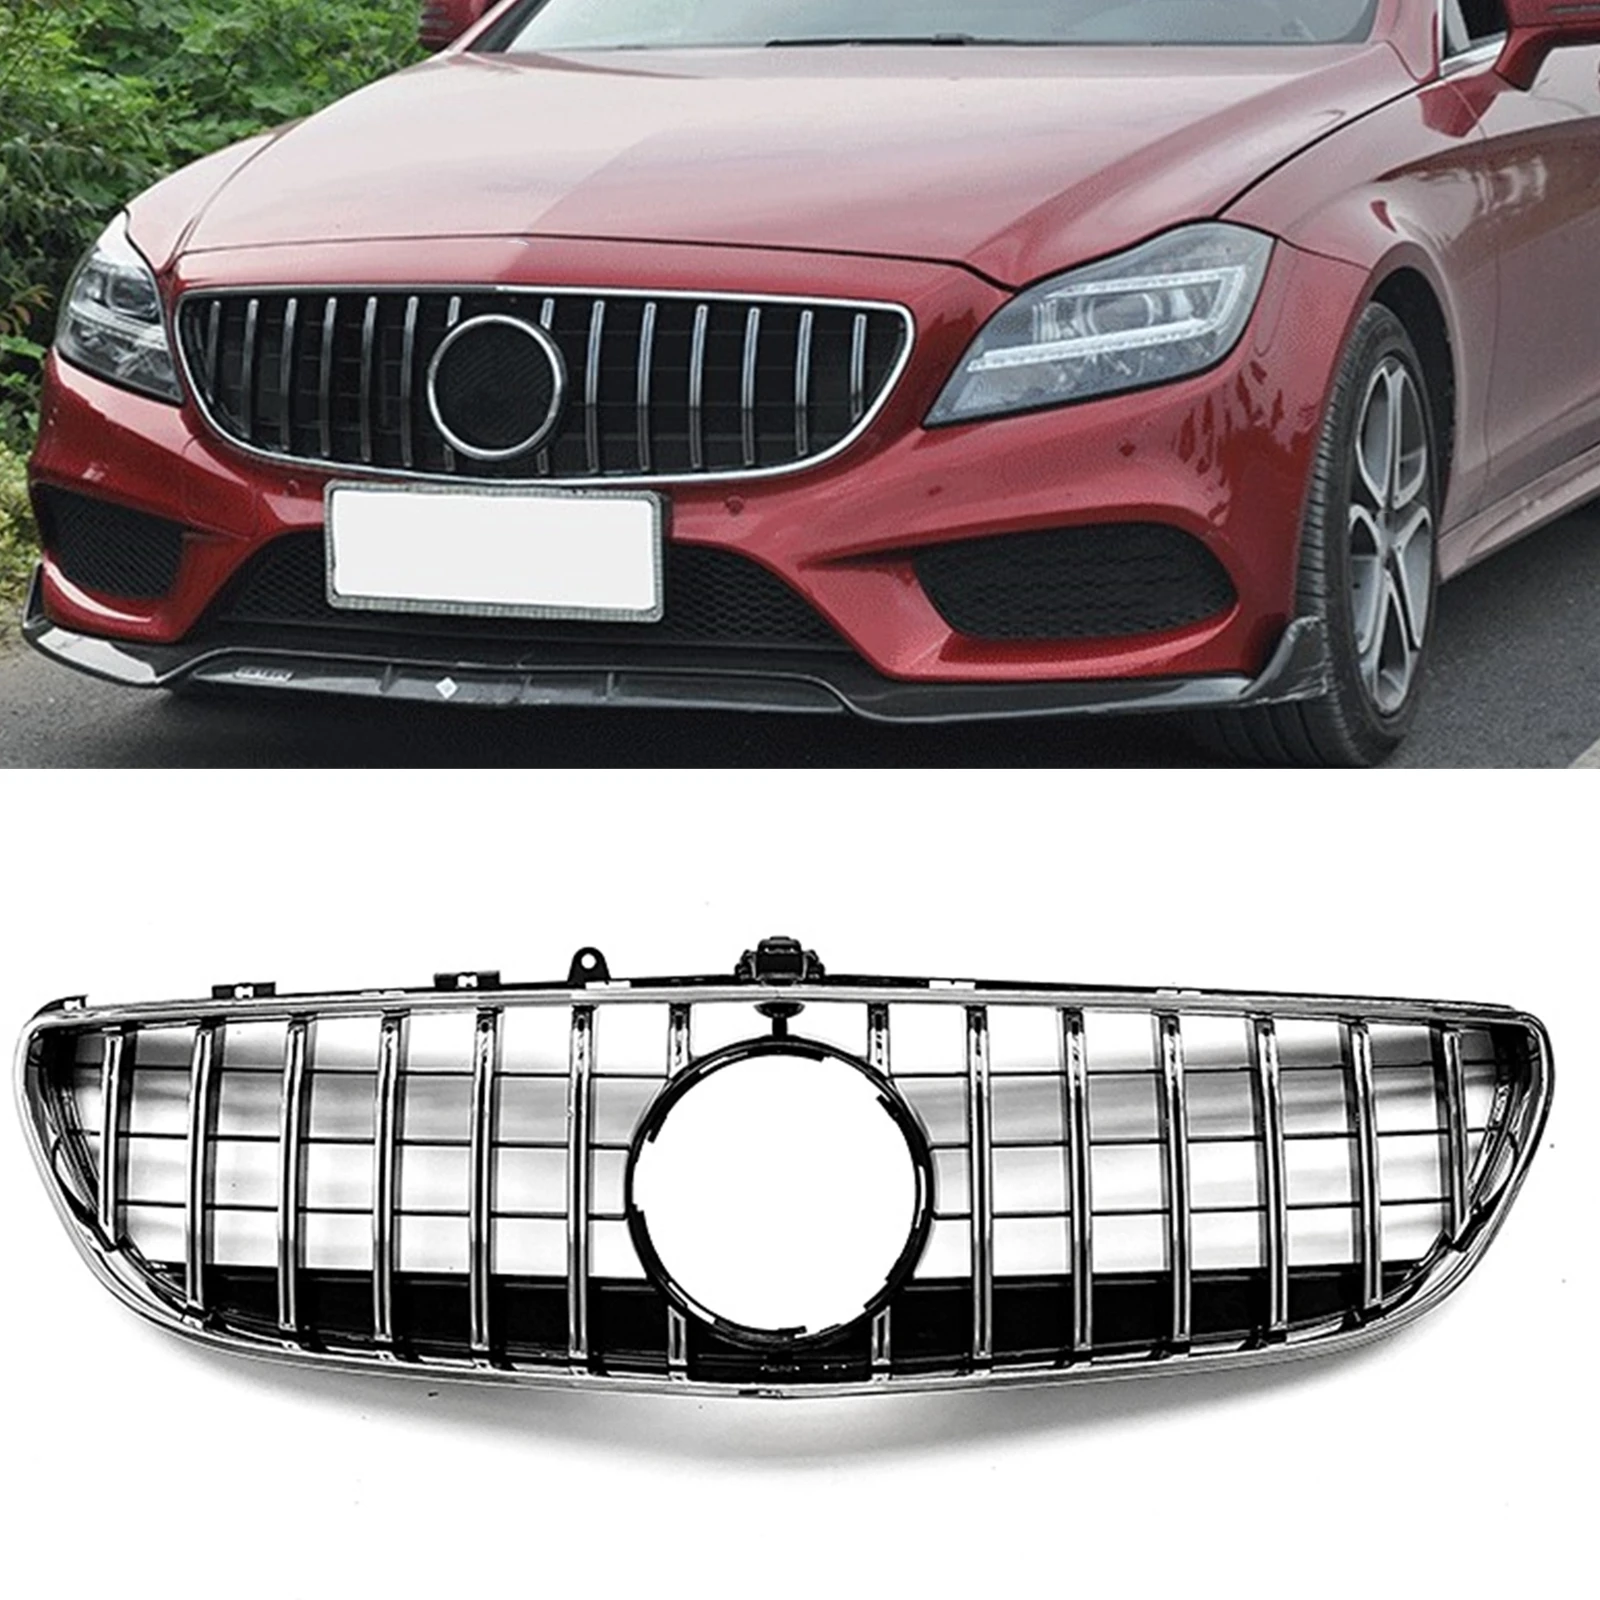 

Front Grille Grill For Mercedes Benz W218 CLS 2015-2018 CLS260 CLS300 CLS320 CLS350 CLS400 CLS500 GT Car Upper Bumper Hood Mesh